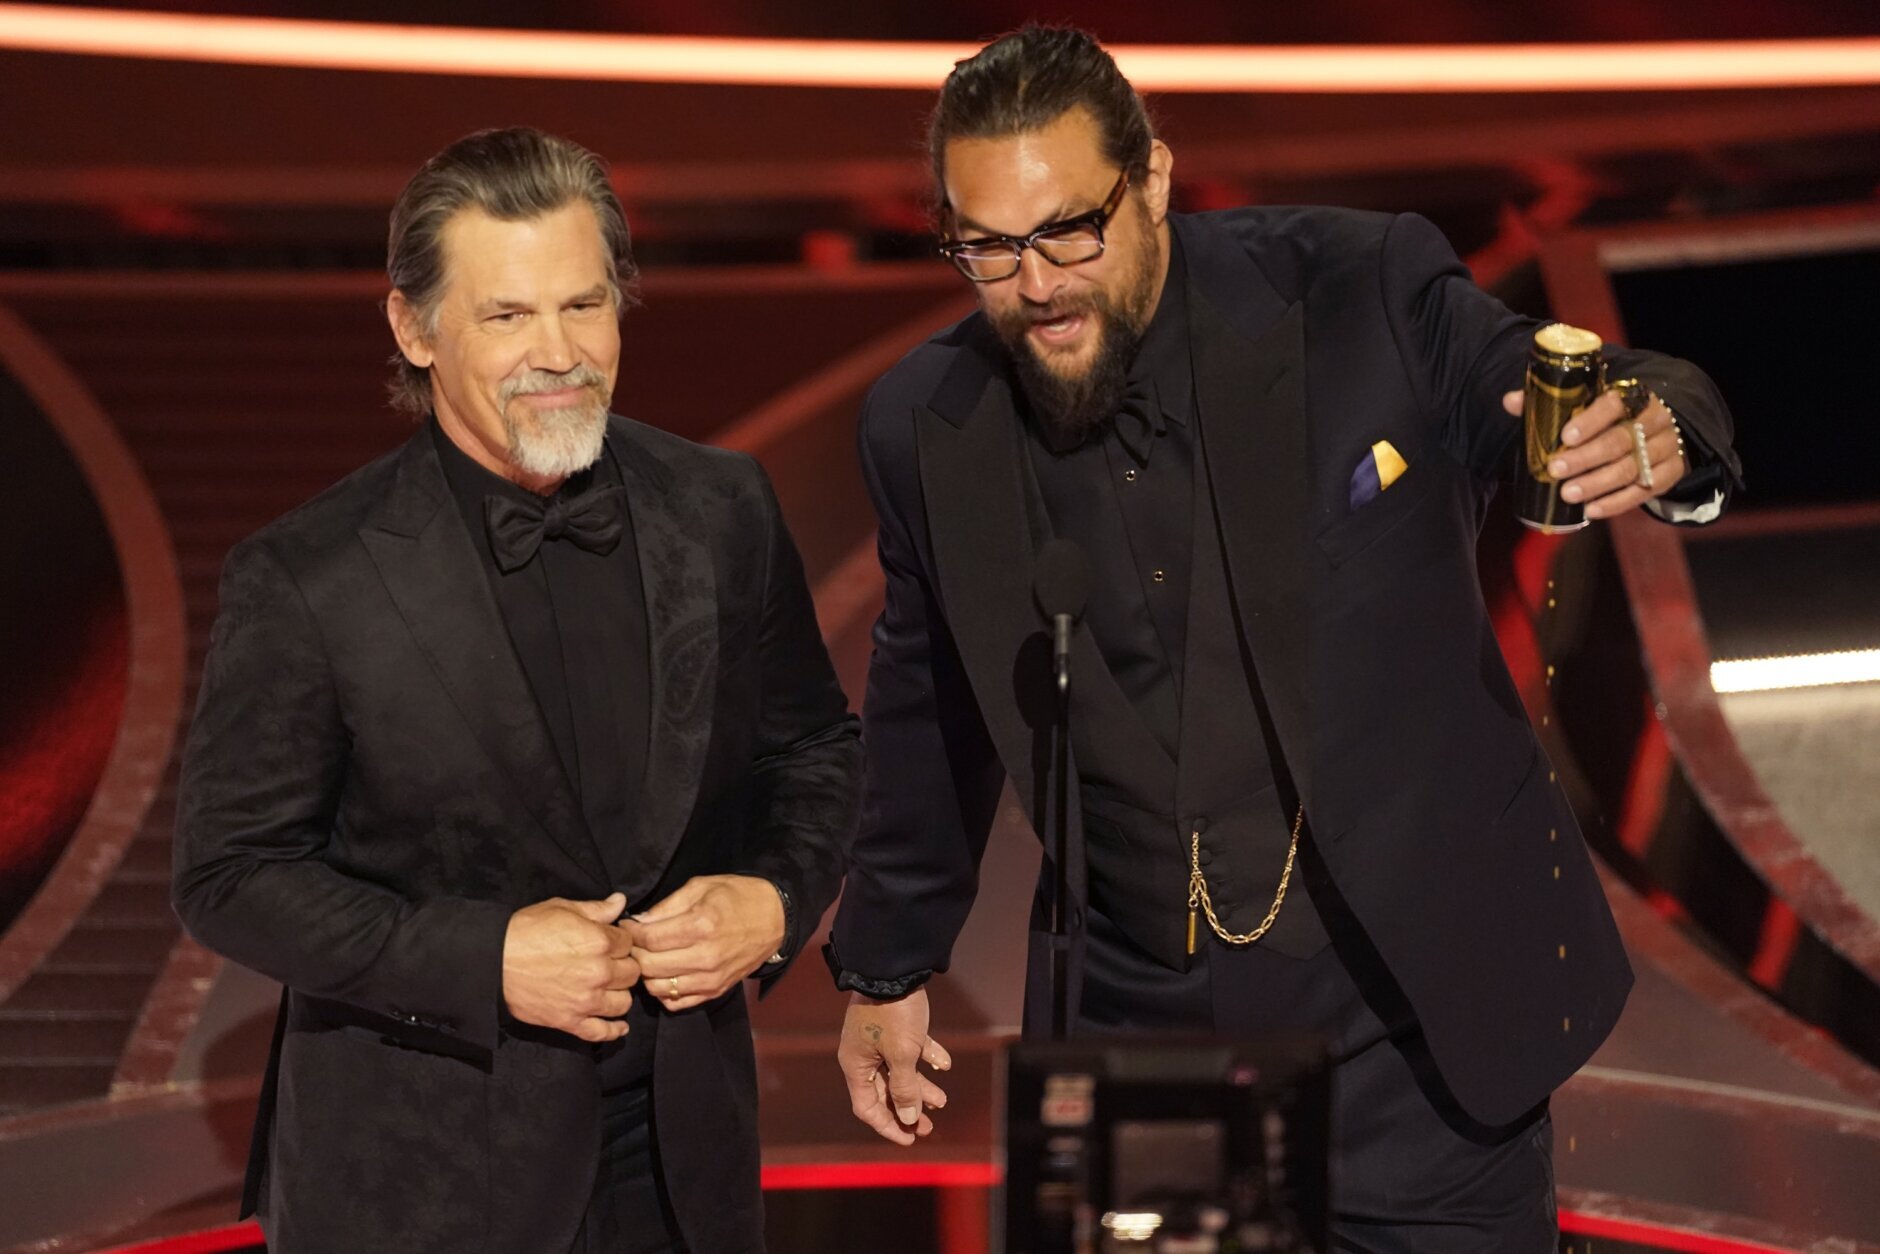 Josh Brolin, left, and Jason Momoa present the award for best sound at the Oscars on Sunday, March 27, 2022, at the Dolby Theatre in Los Angeles. (AP Photo/Chris Pizzello)